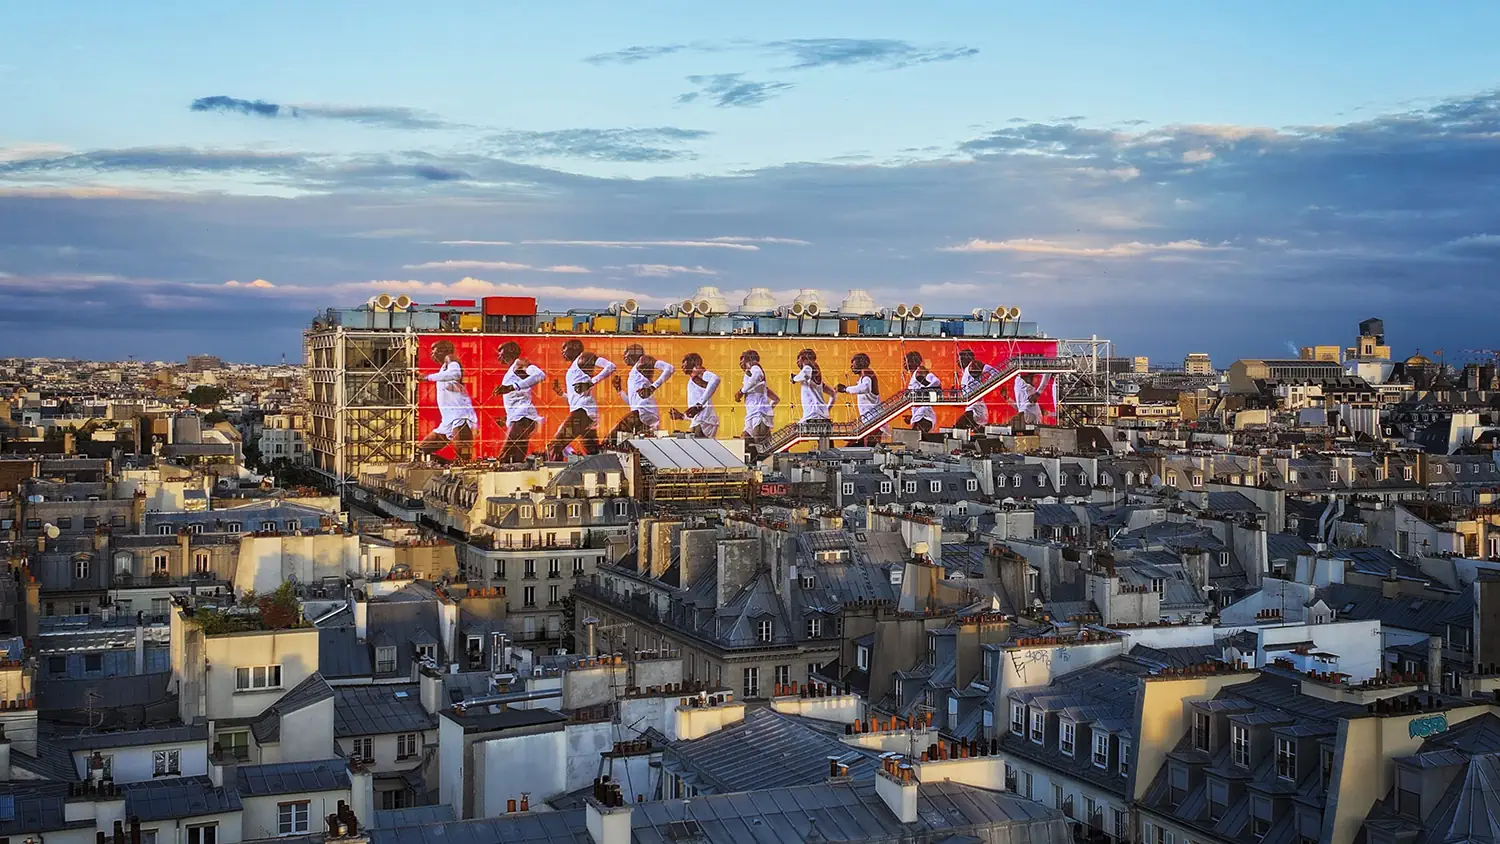 Nike opens "Art of Victory" exhibition at Centre Pompidou in Paris